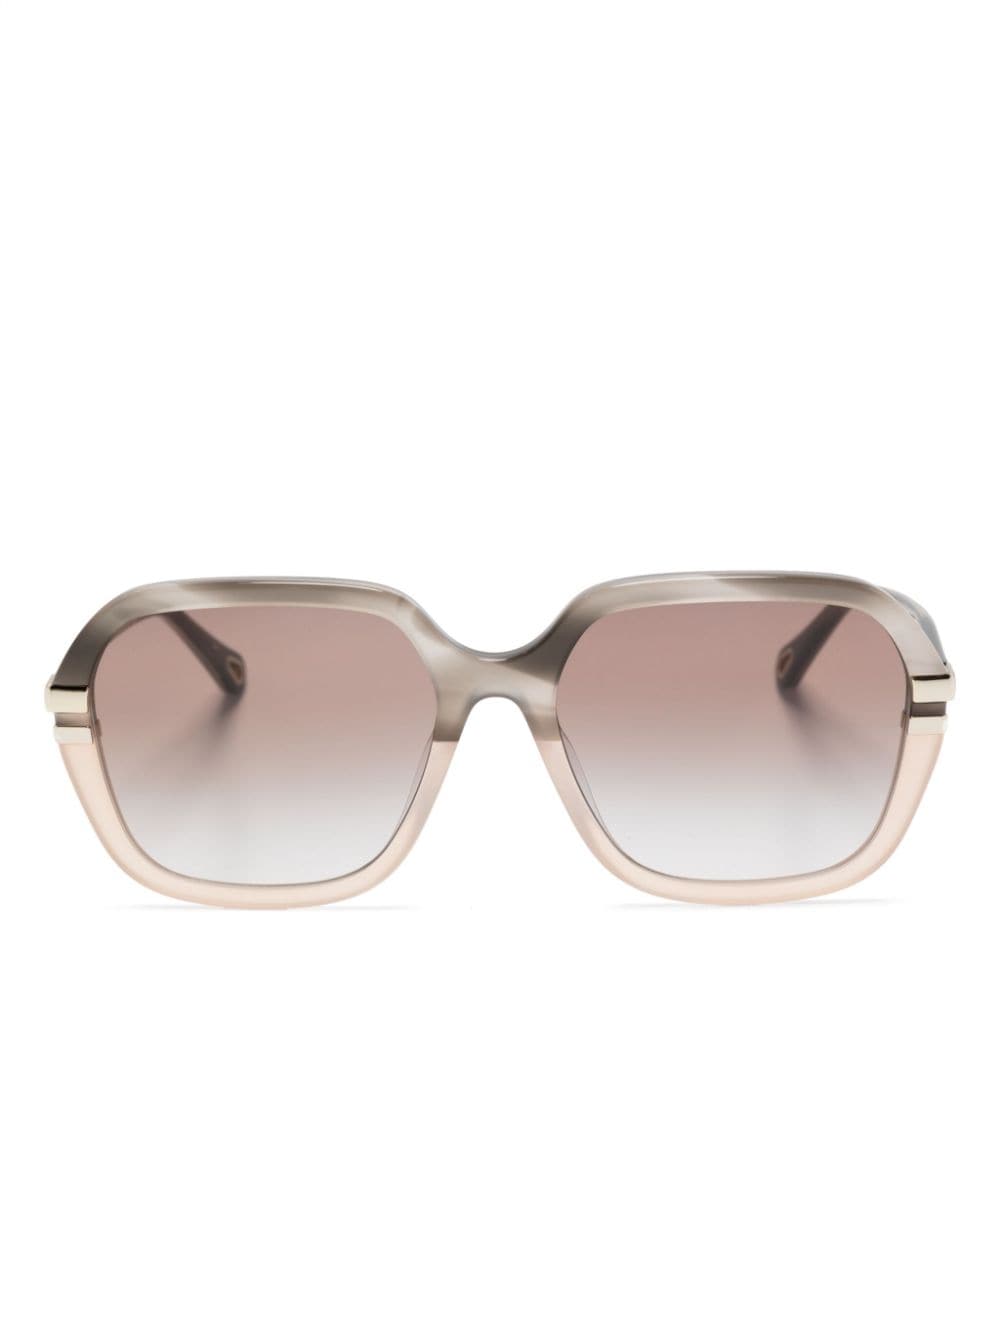 Chloé Ombré-effect Square-frame Sunglasses In Nude